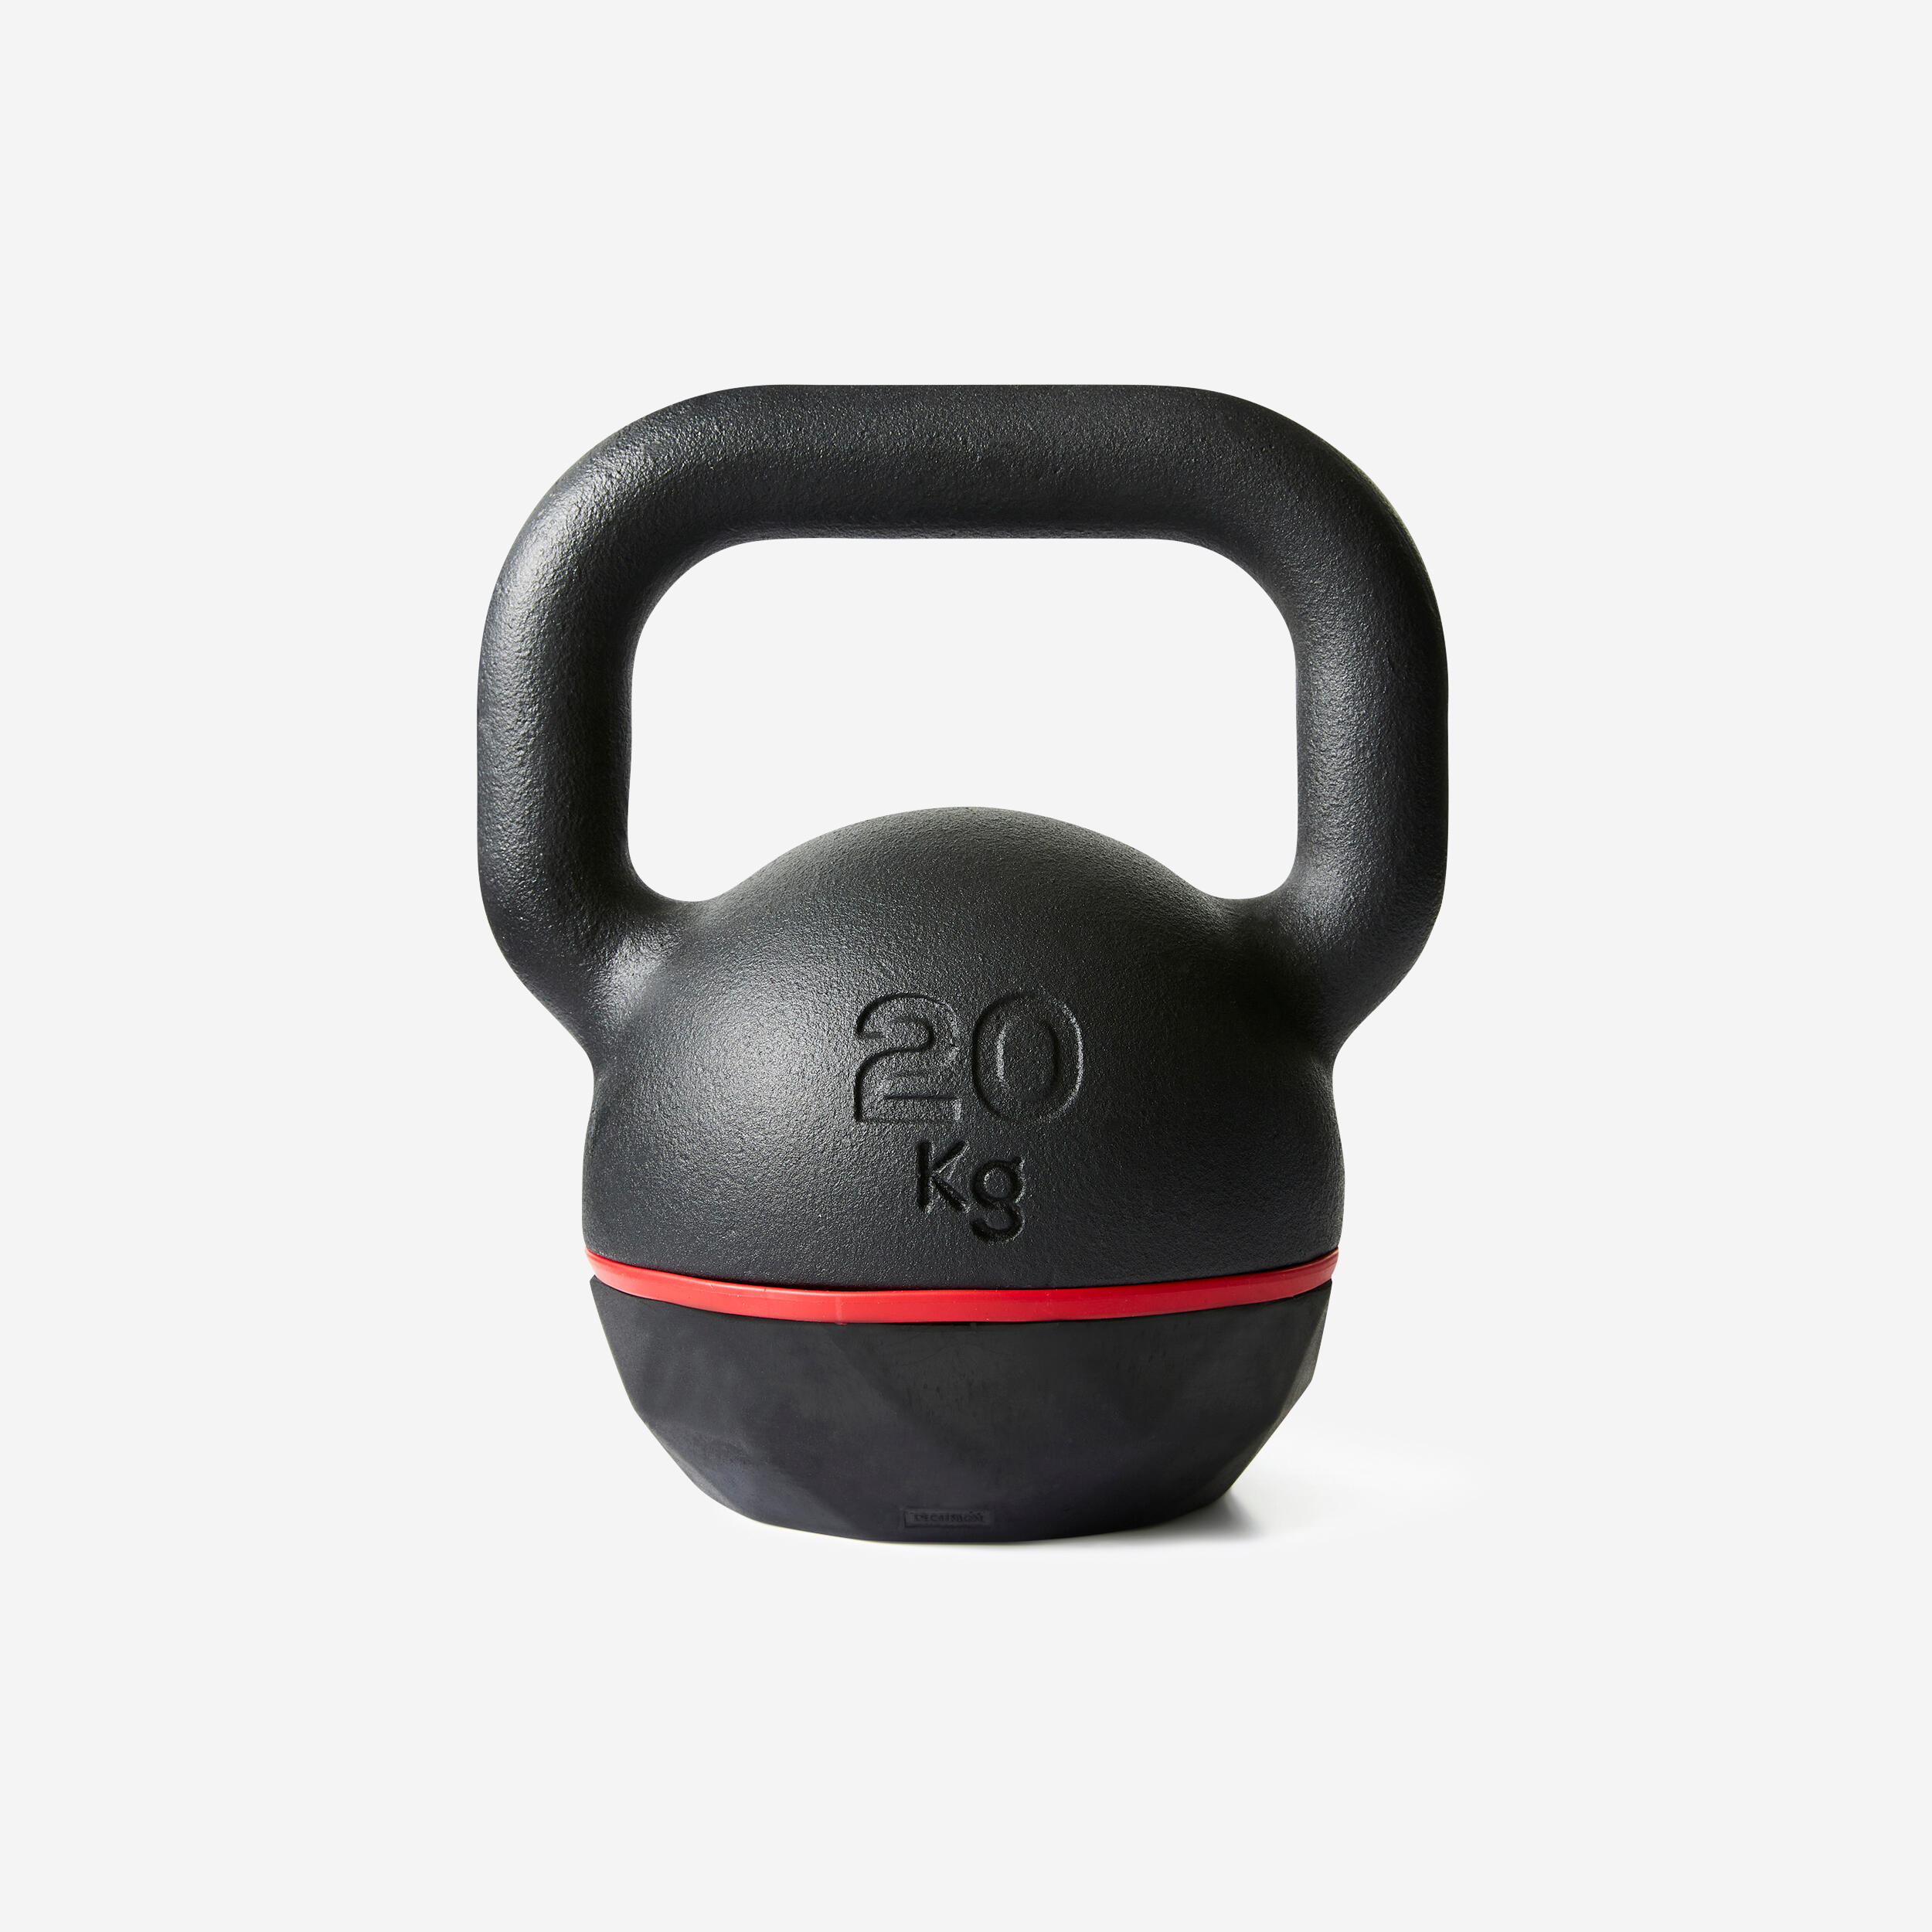 CORENGTH Cast Iron Kettlebell with Rubber Base - 20 kg